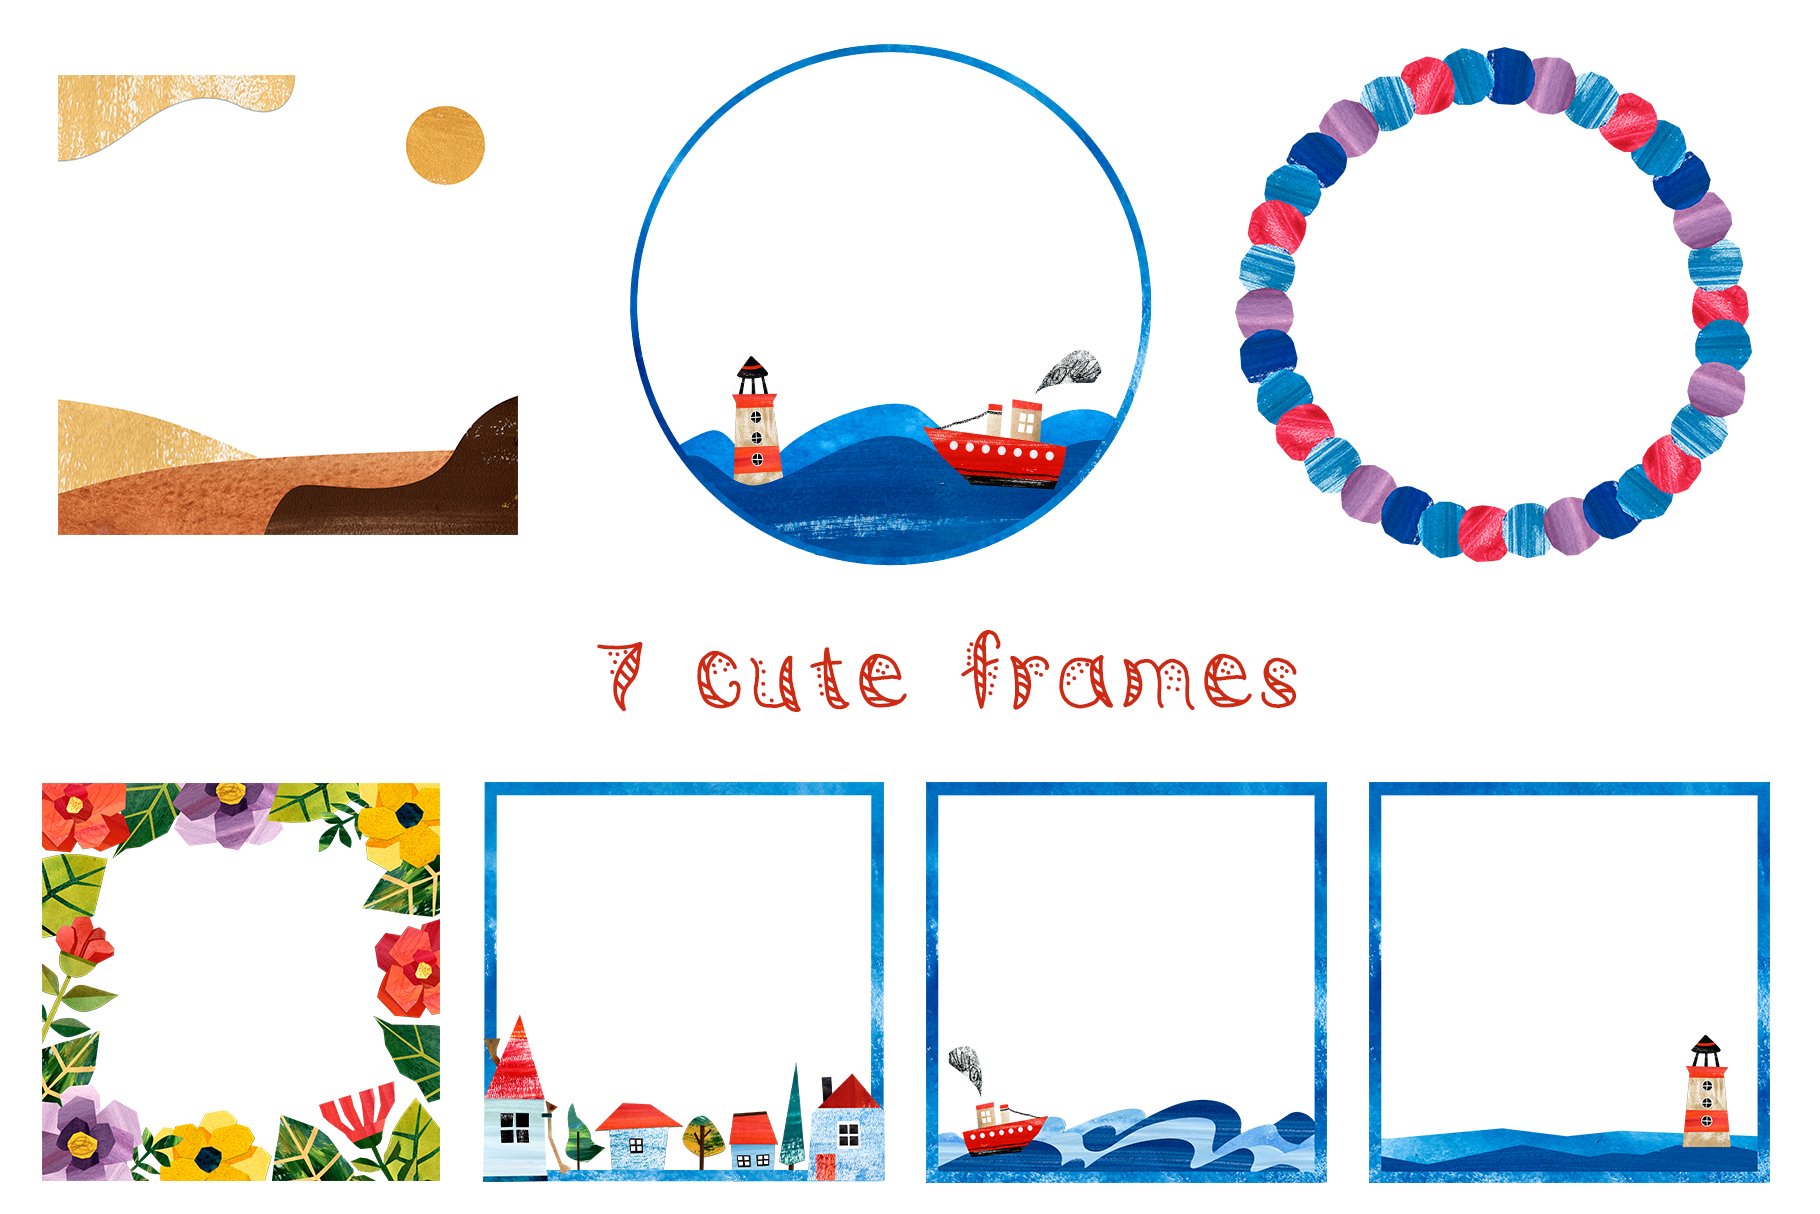 There are 7 cute themed frames.